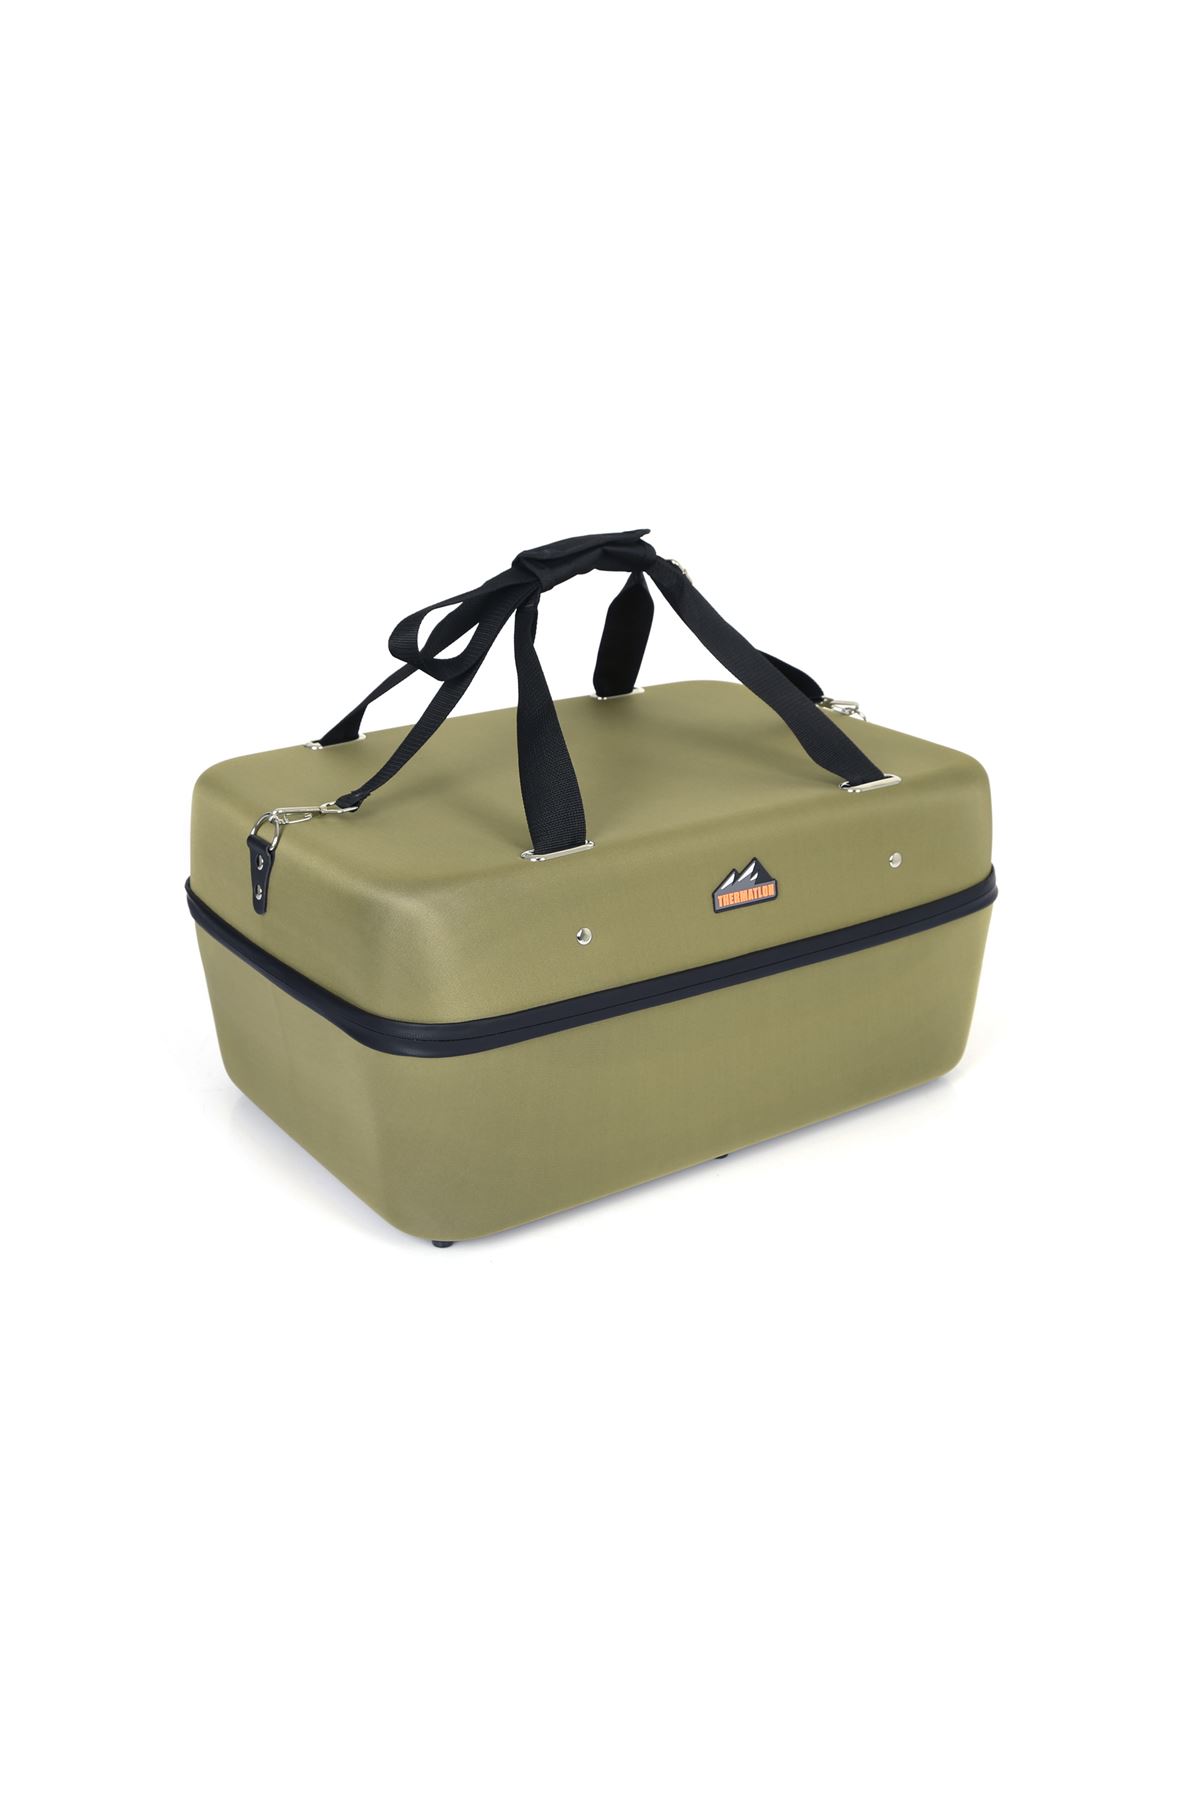 Thermatlon Camping Cooler 21 LT